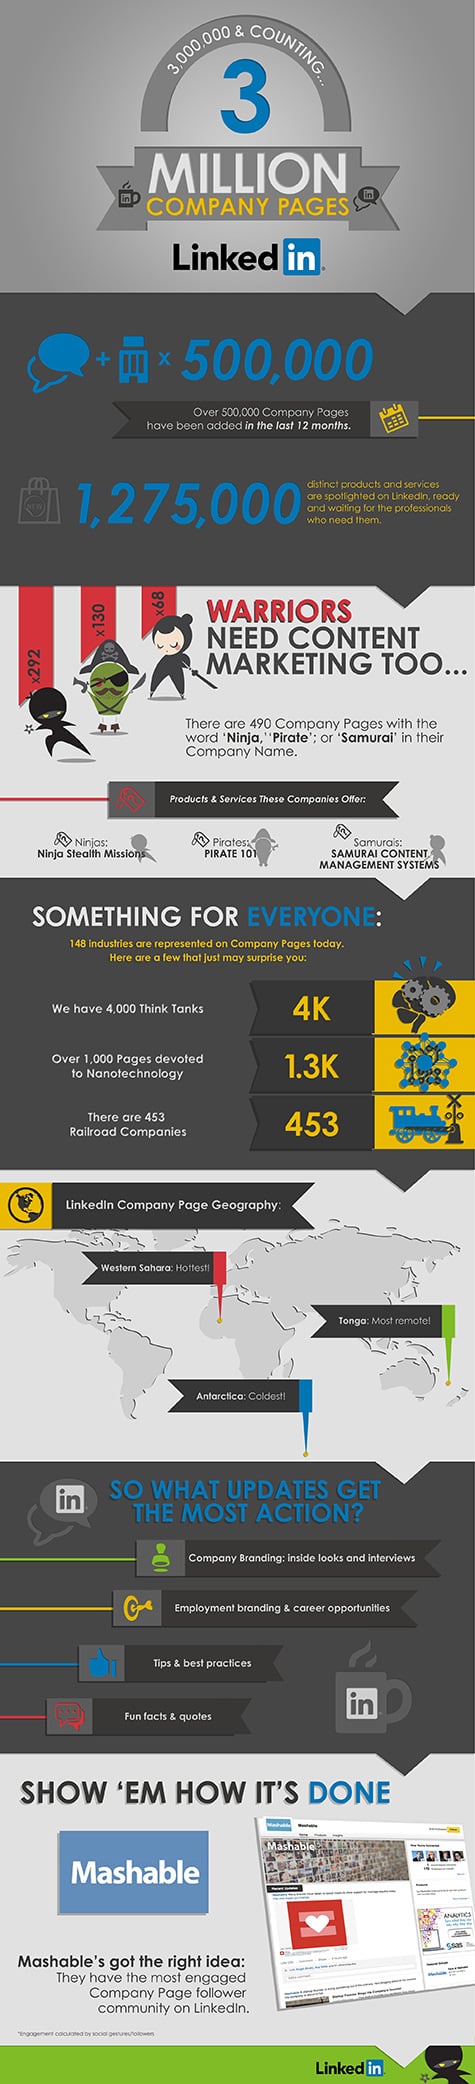 3 Million LinkedIn Company Pages and Counting [Infographic]